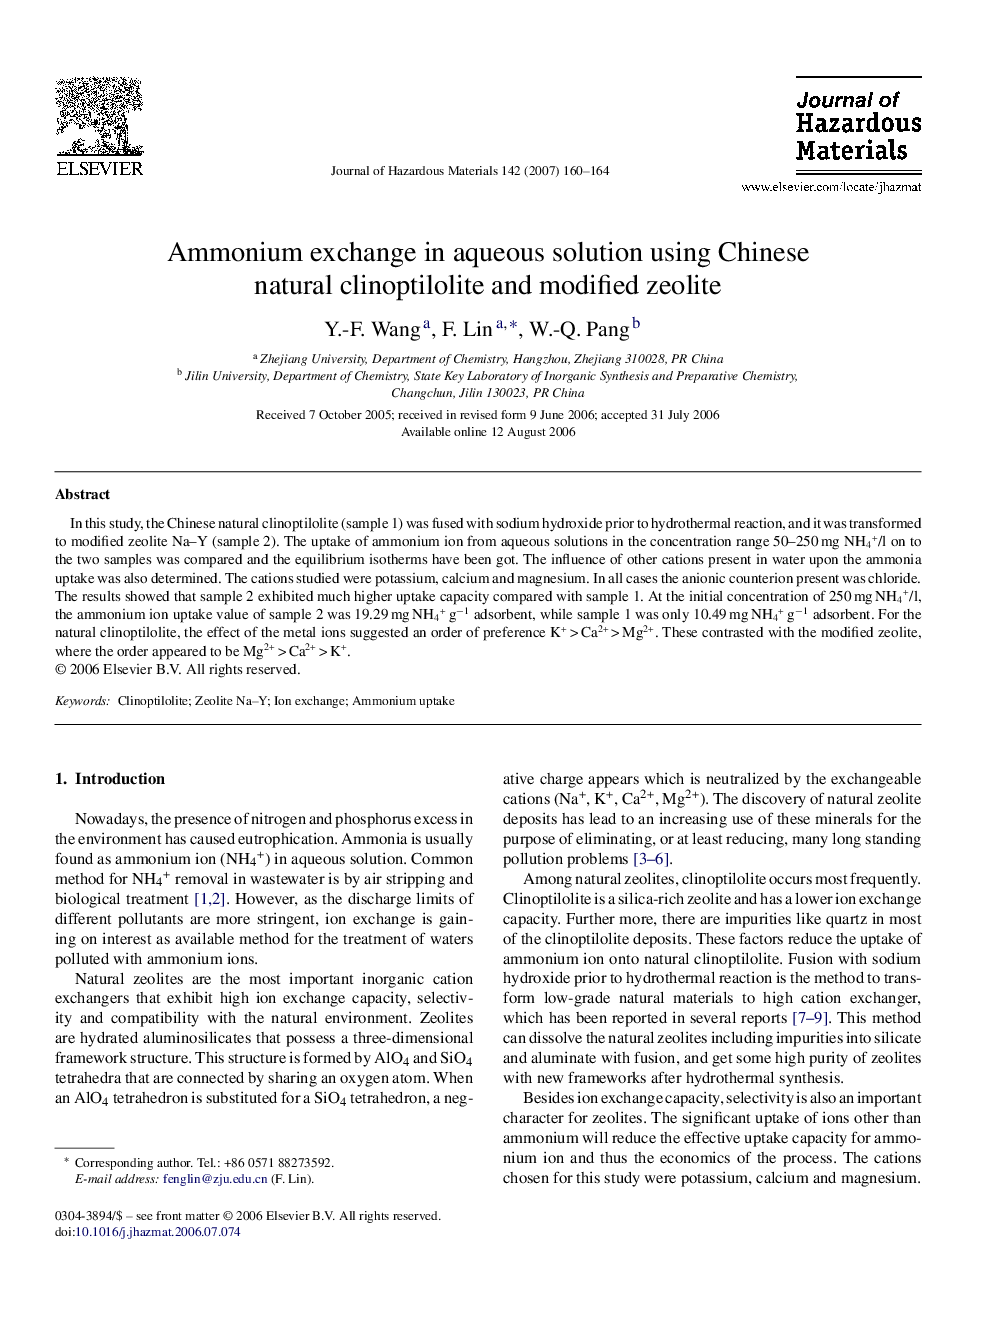 Ammonium exchange in aqueous solution using Chinese natural clinoptilolite and modified zeolite